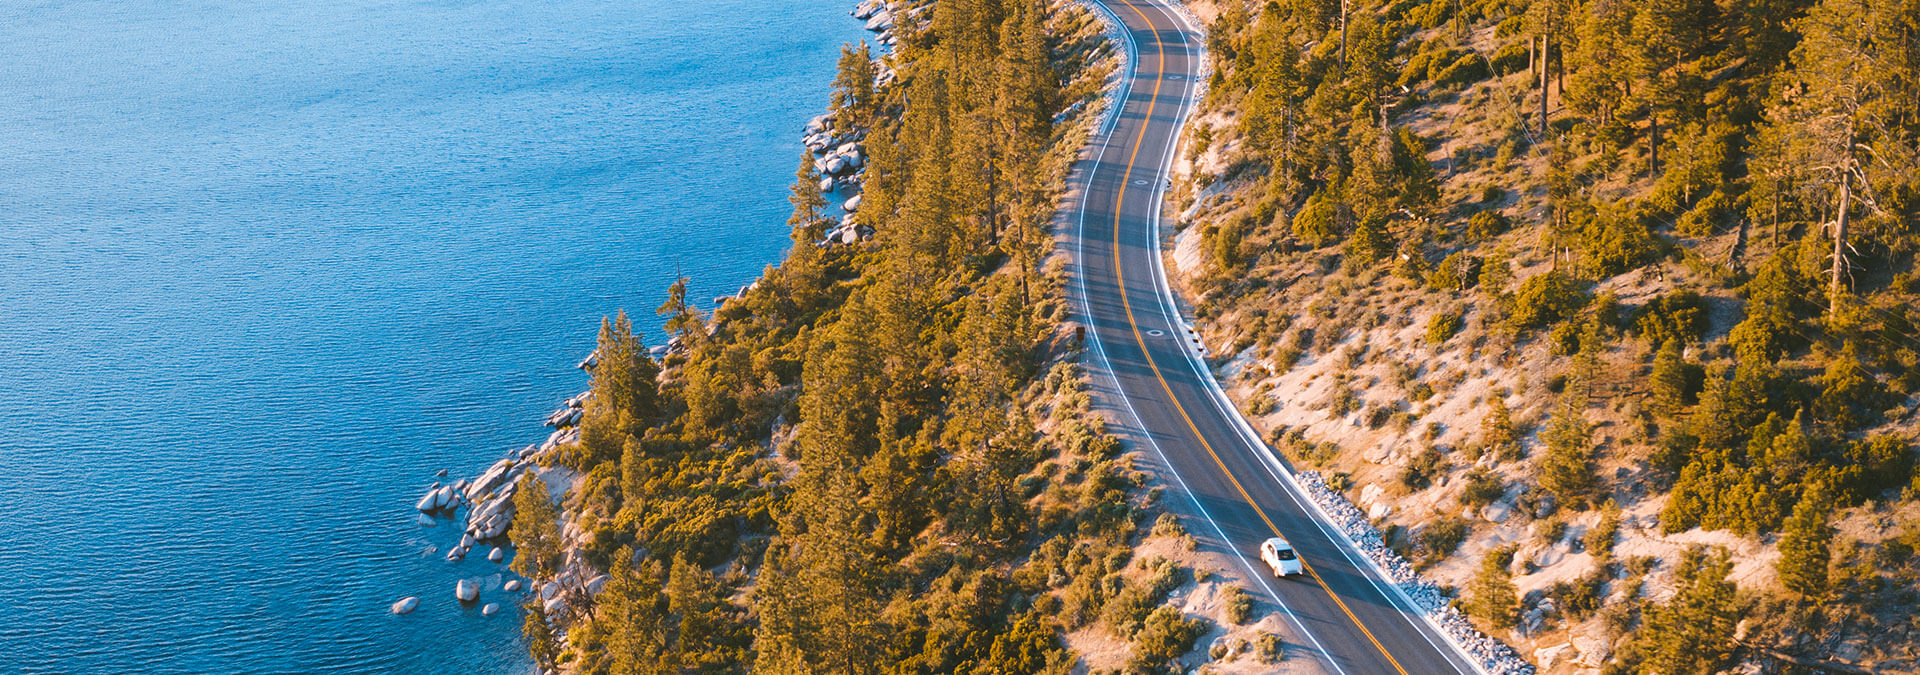 Aerial view of State Route 28 alongside Lake Tahoe